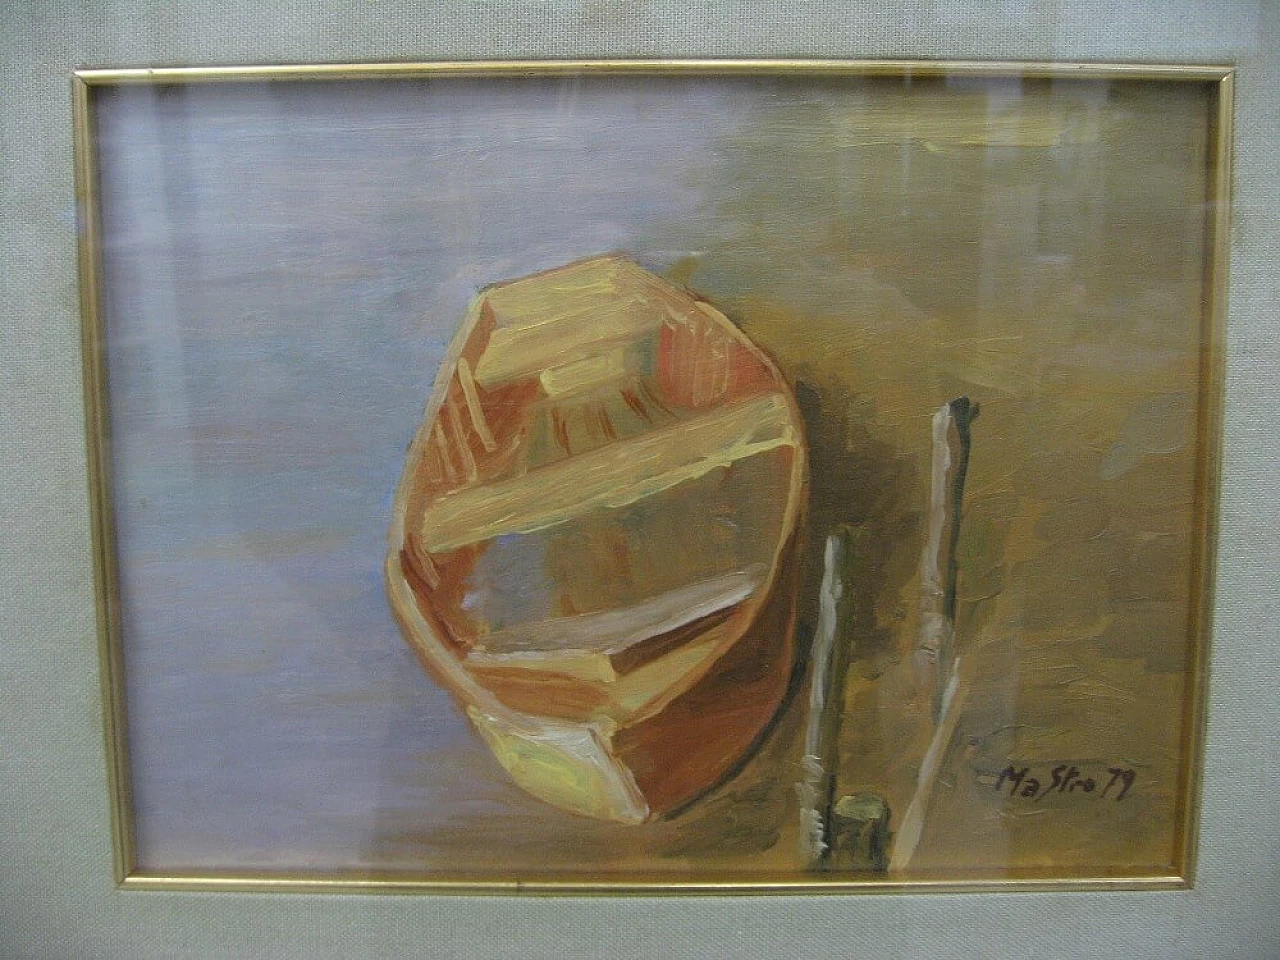 Mario Strocchi, Boat on the Rhine, oil painting on plywood, 1979 3